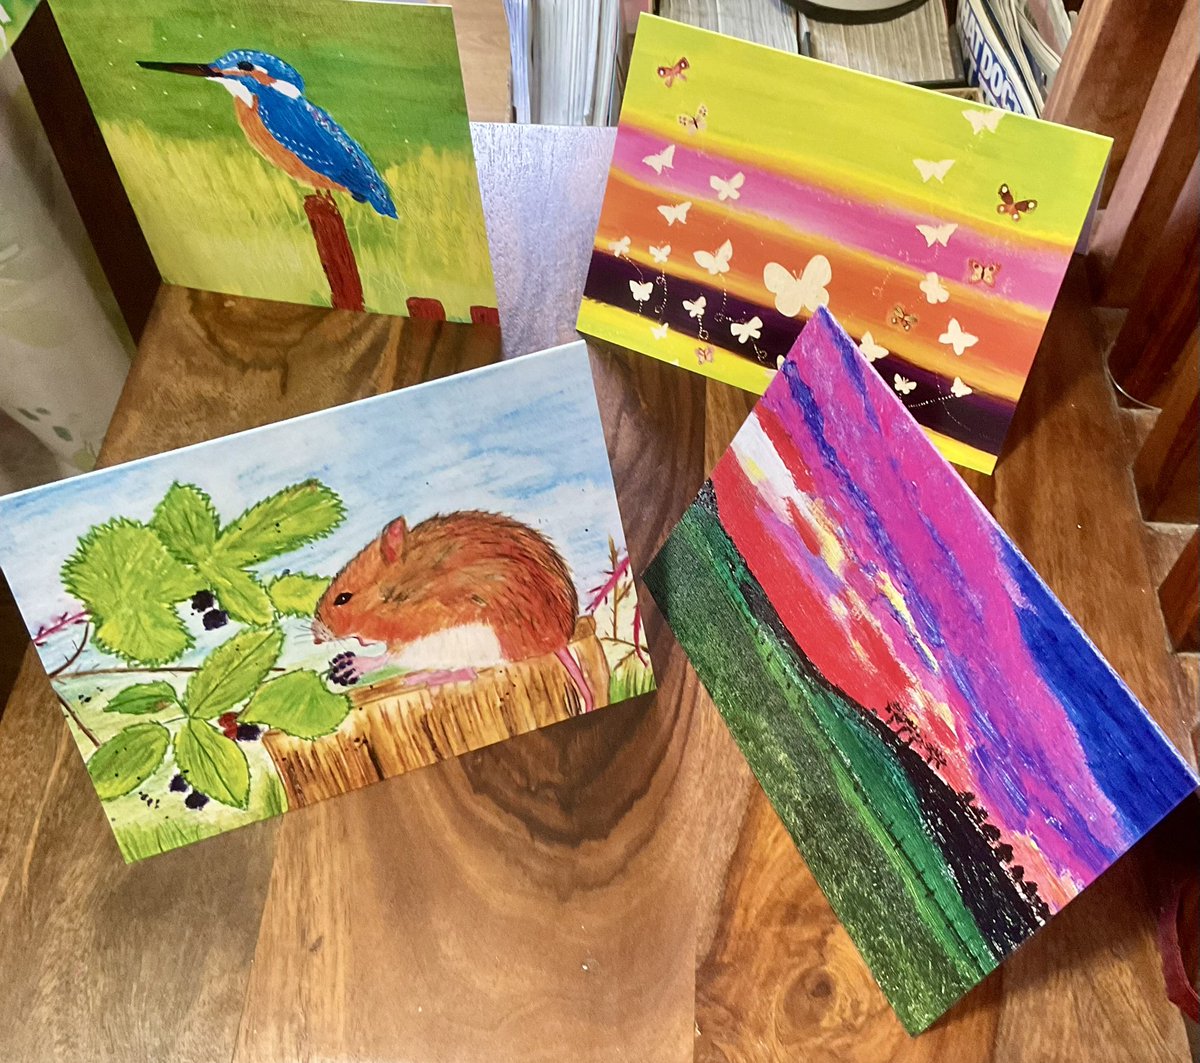 My new cards are all packed up with their recycled paper envelope and biodegradable wallet.  Only took an hour and a half thanks to help from hubby @capnross. They now await your order along with 40 other bright, cheerful designs.

debhandmade.com/shop/cards

#cards #greetingcards